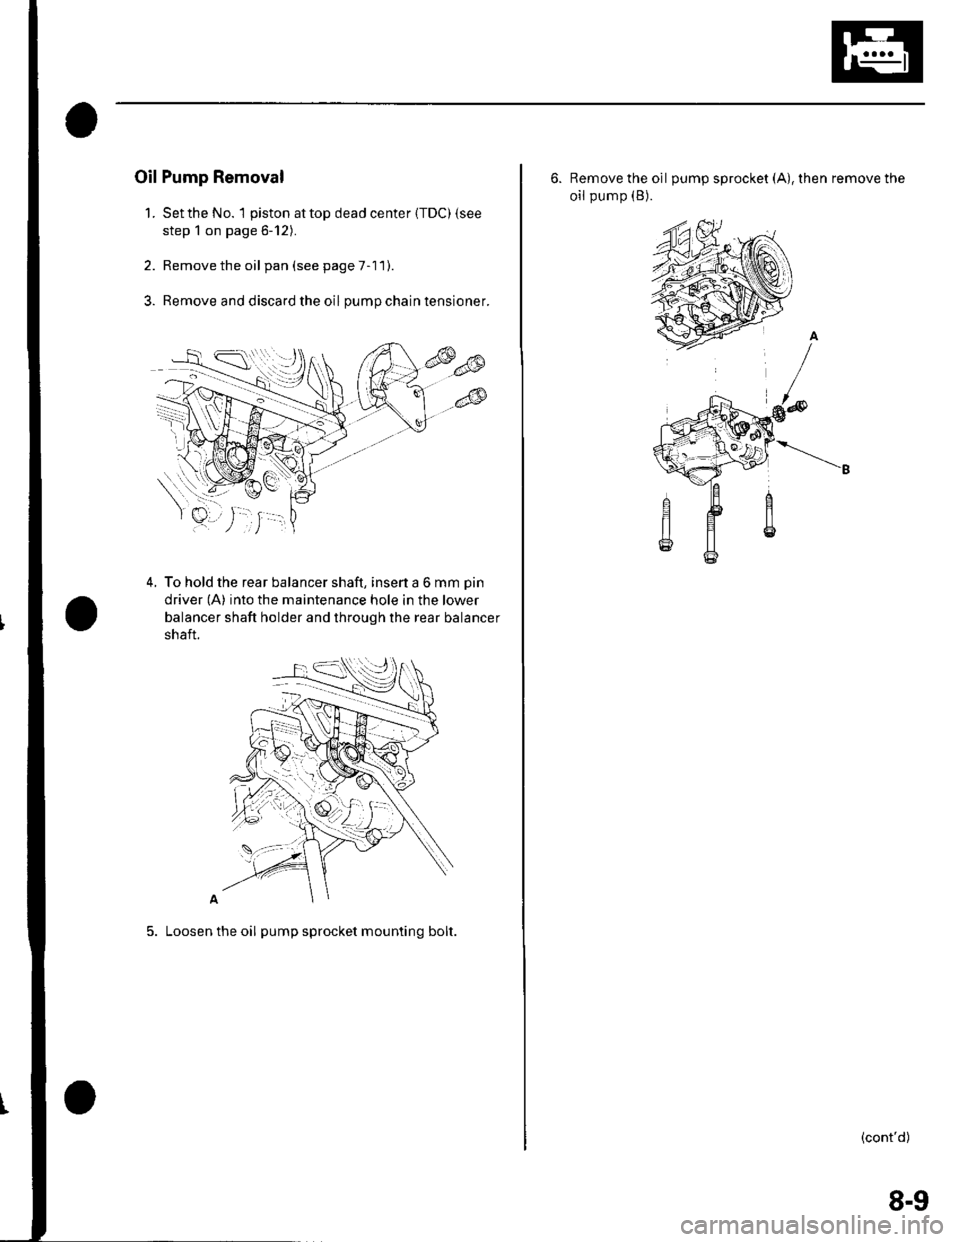 HONDA CIVIC 2002 7.G Workshop Manual Oil Pump Removal
1. Setthe No. 1 piston attop dead center {TDC) {see
step 1 on page 6-12).
2. Remove the oil pan(seepageT-11).
3. Remove and discard the oil pumpchaintensioner.
4. To hold the rear bal